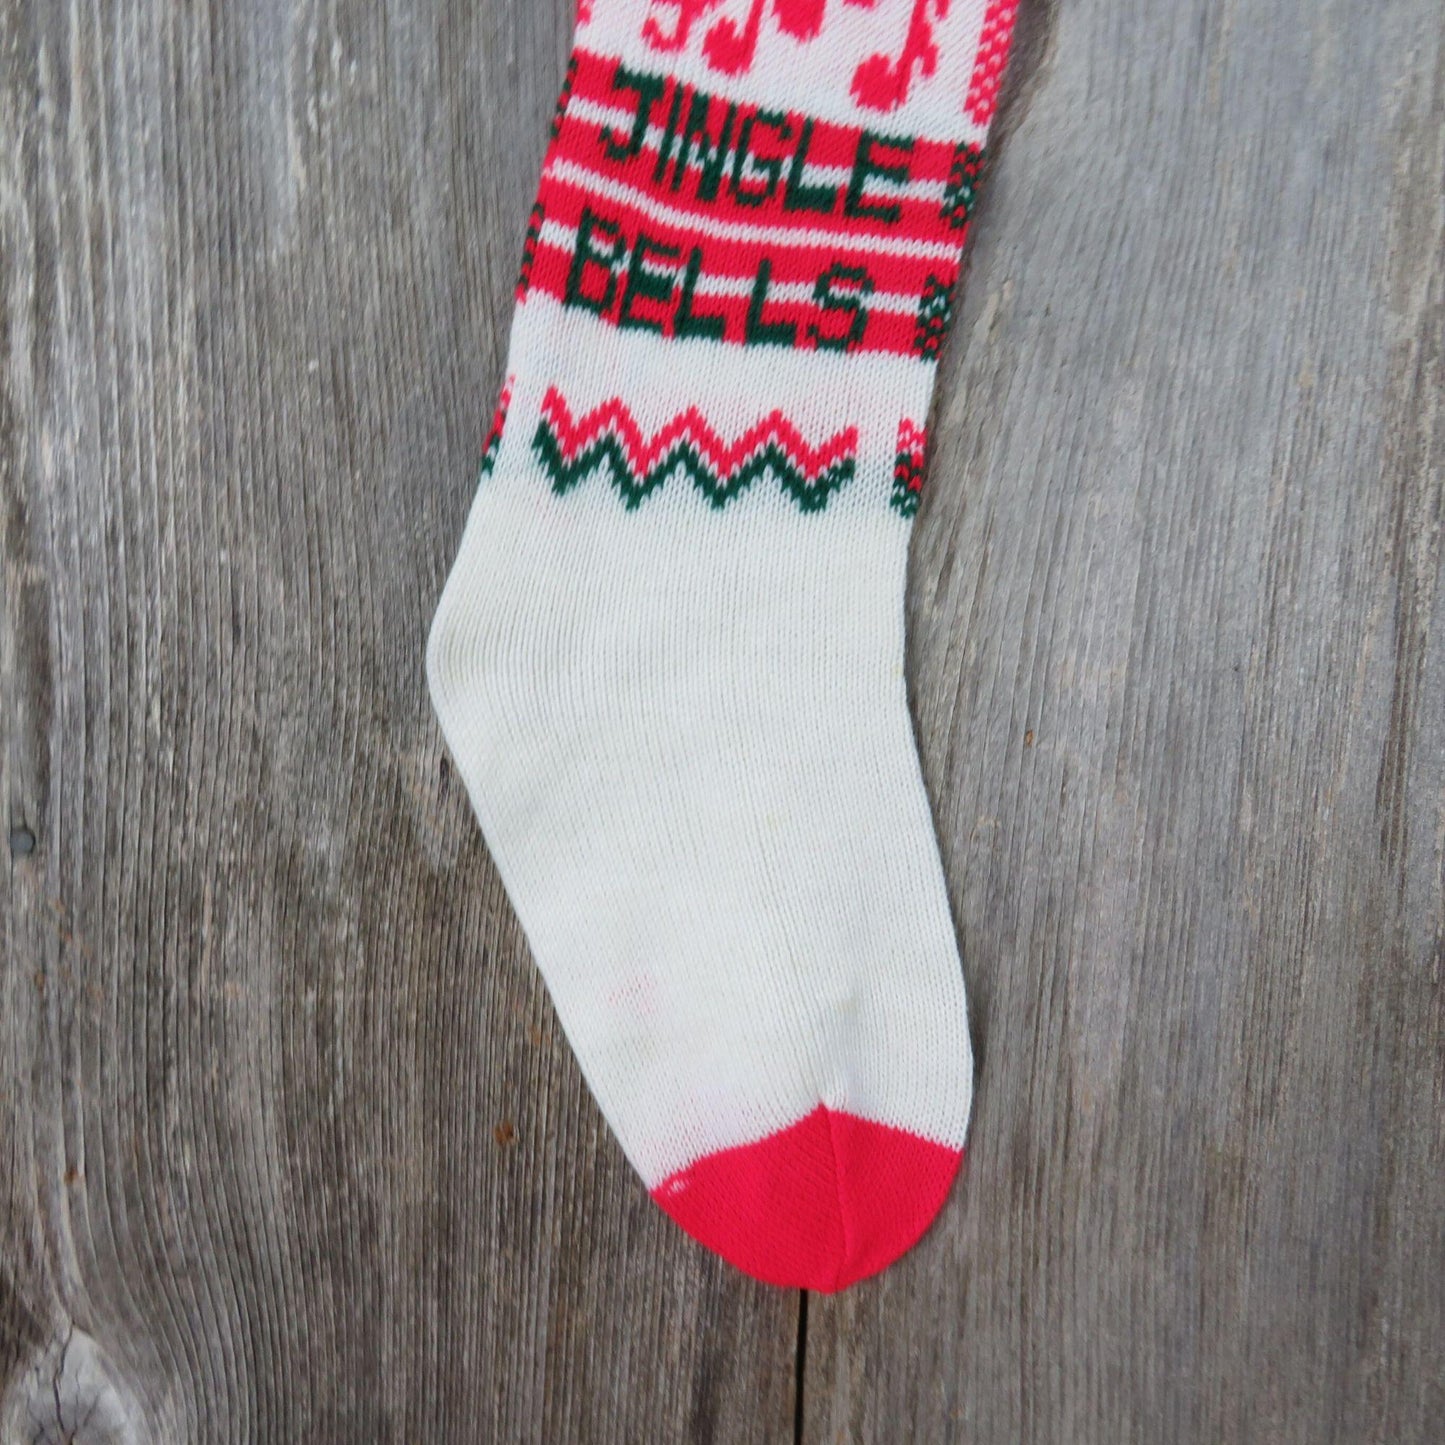 Vintage Jingle Bells  Knit Stocking Christmas Musical Notes Red Green White Pom Pom